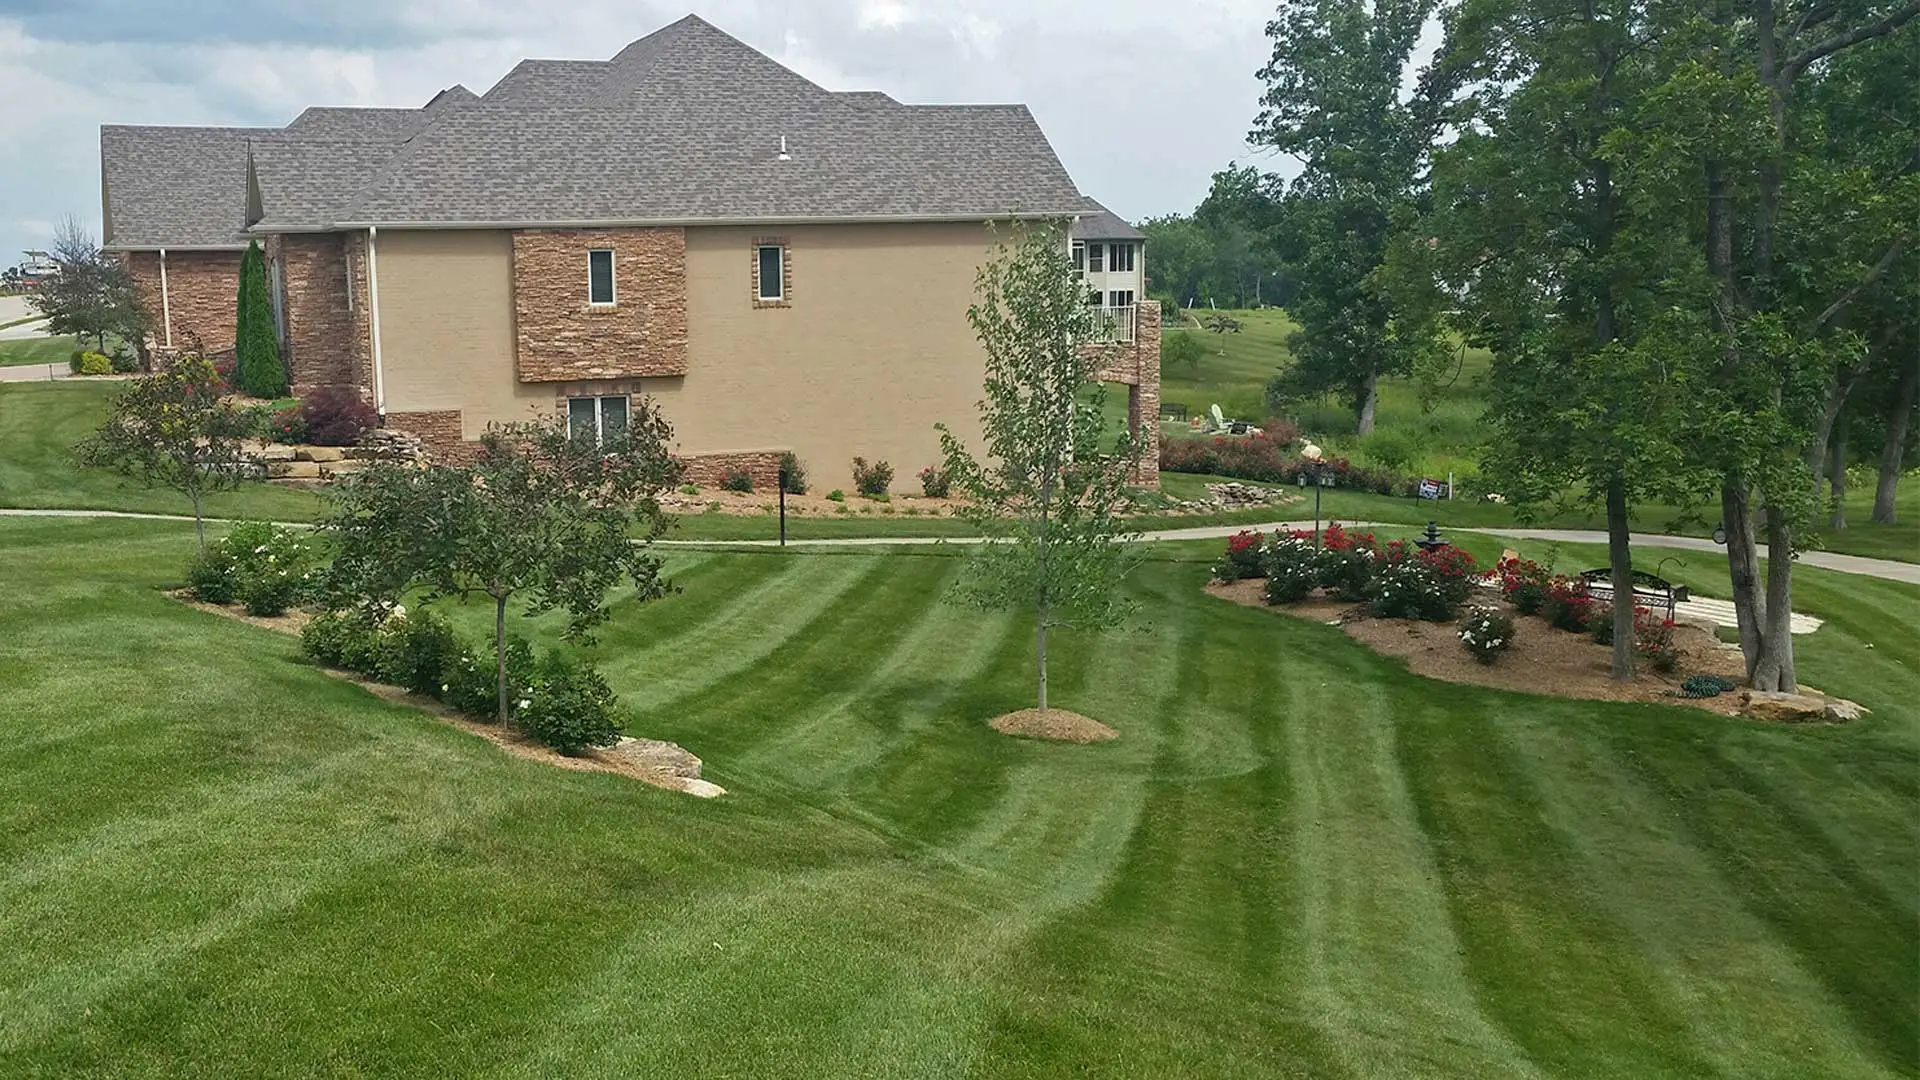 Well maintained lawn and landscaping at residential property.